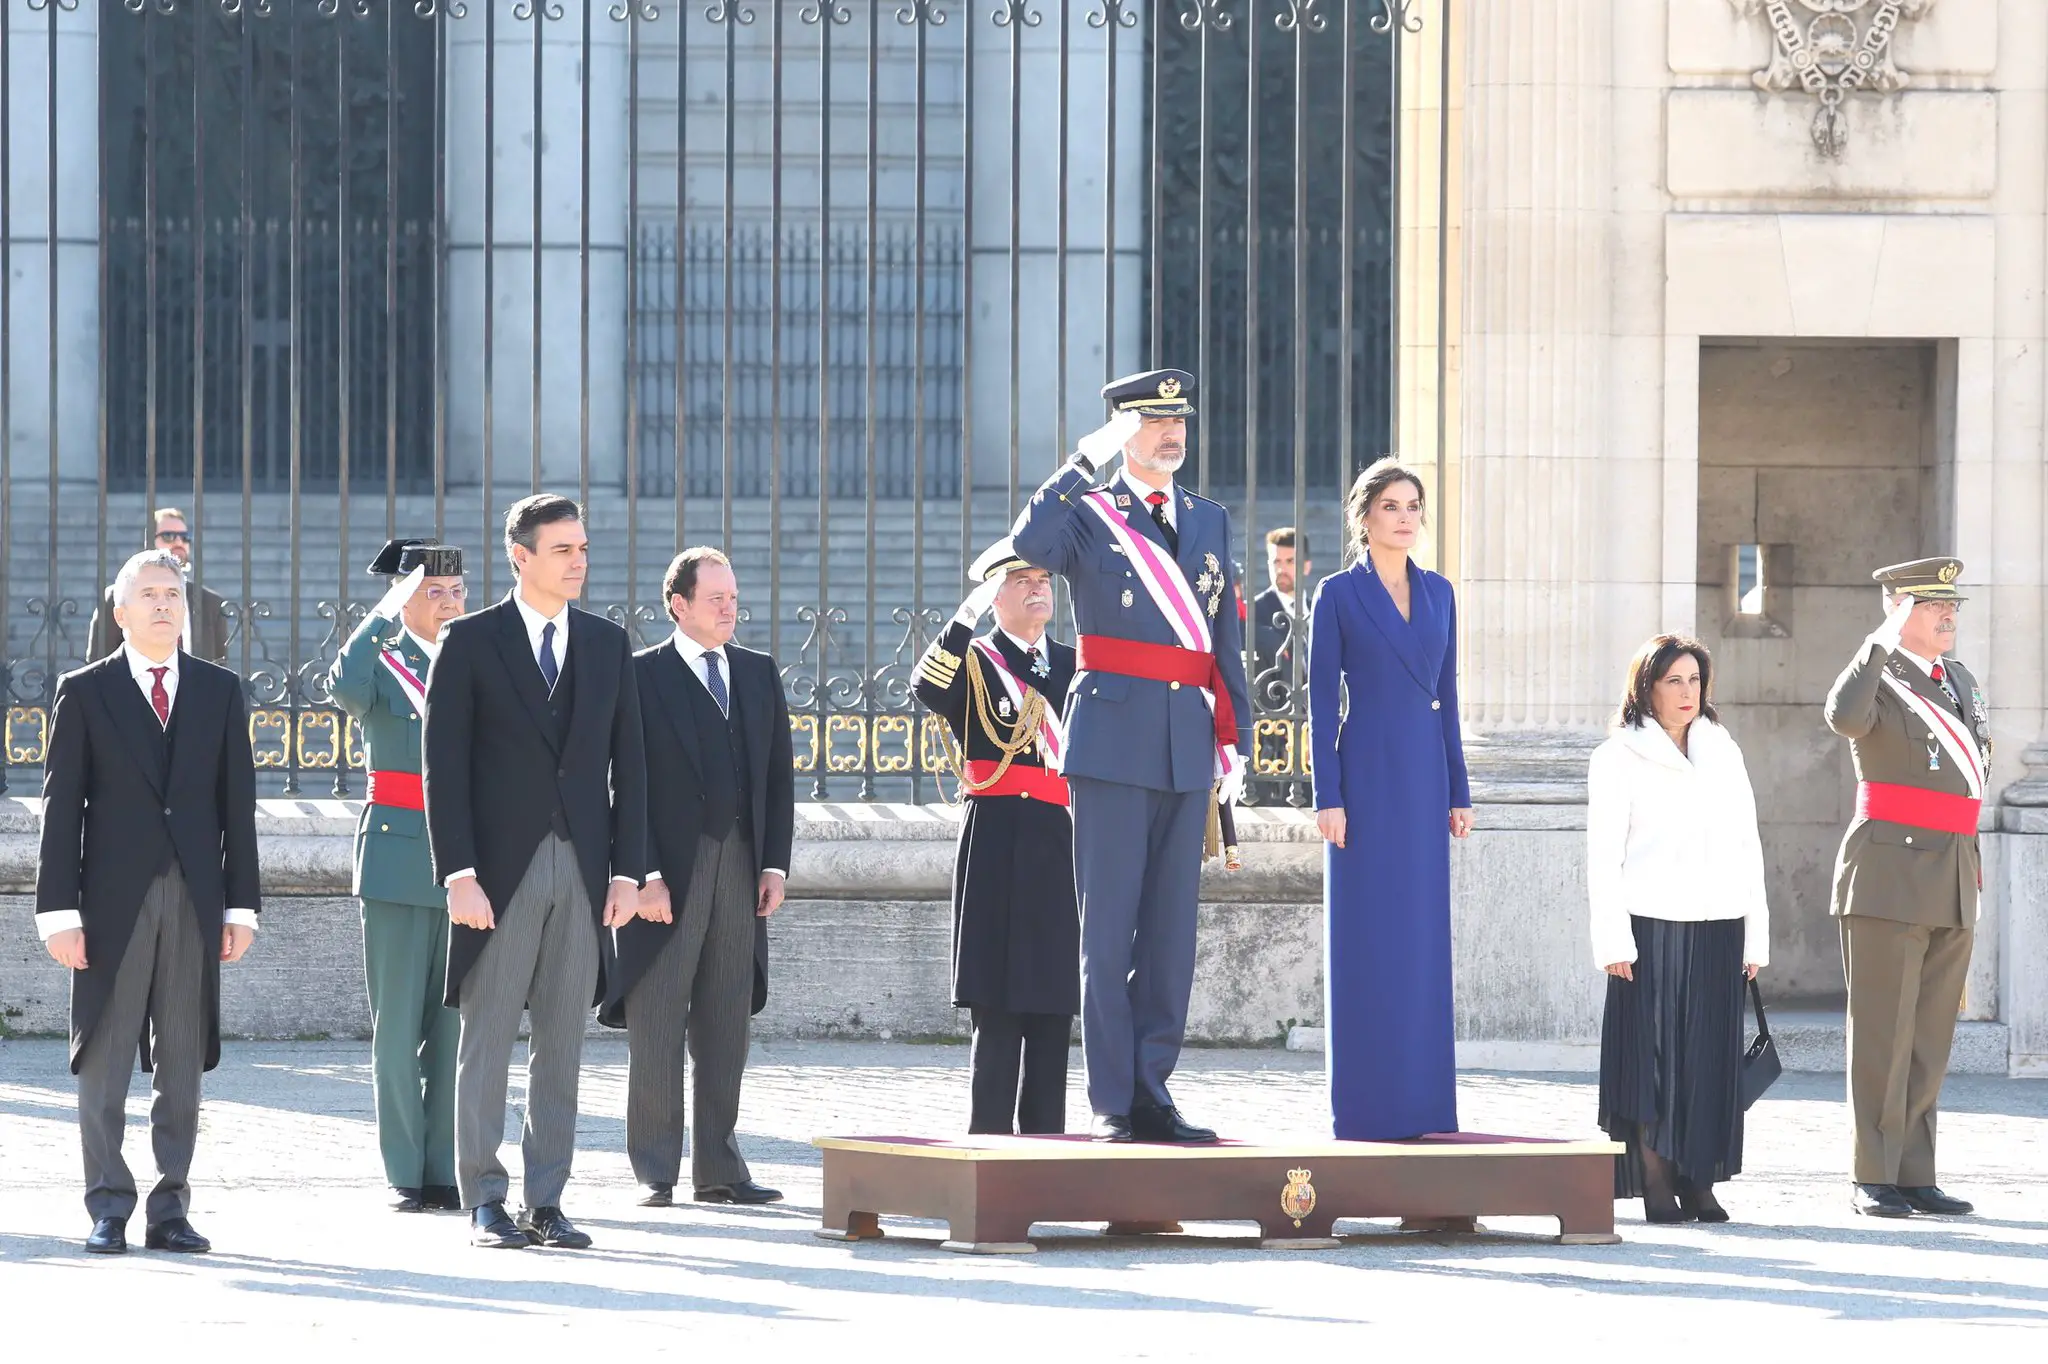 King Felipe and Queen Letizia taking the salute at the Military Easter service 2020